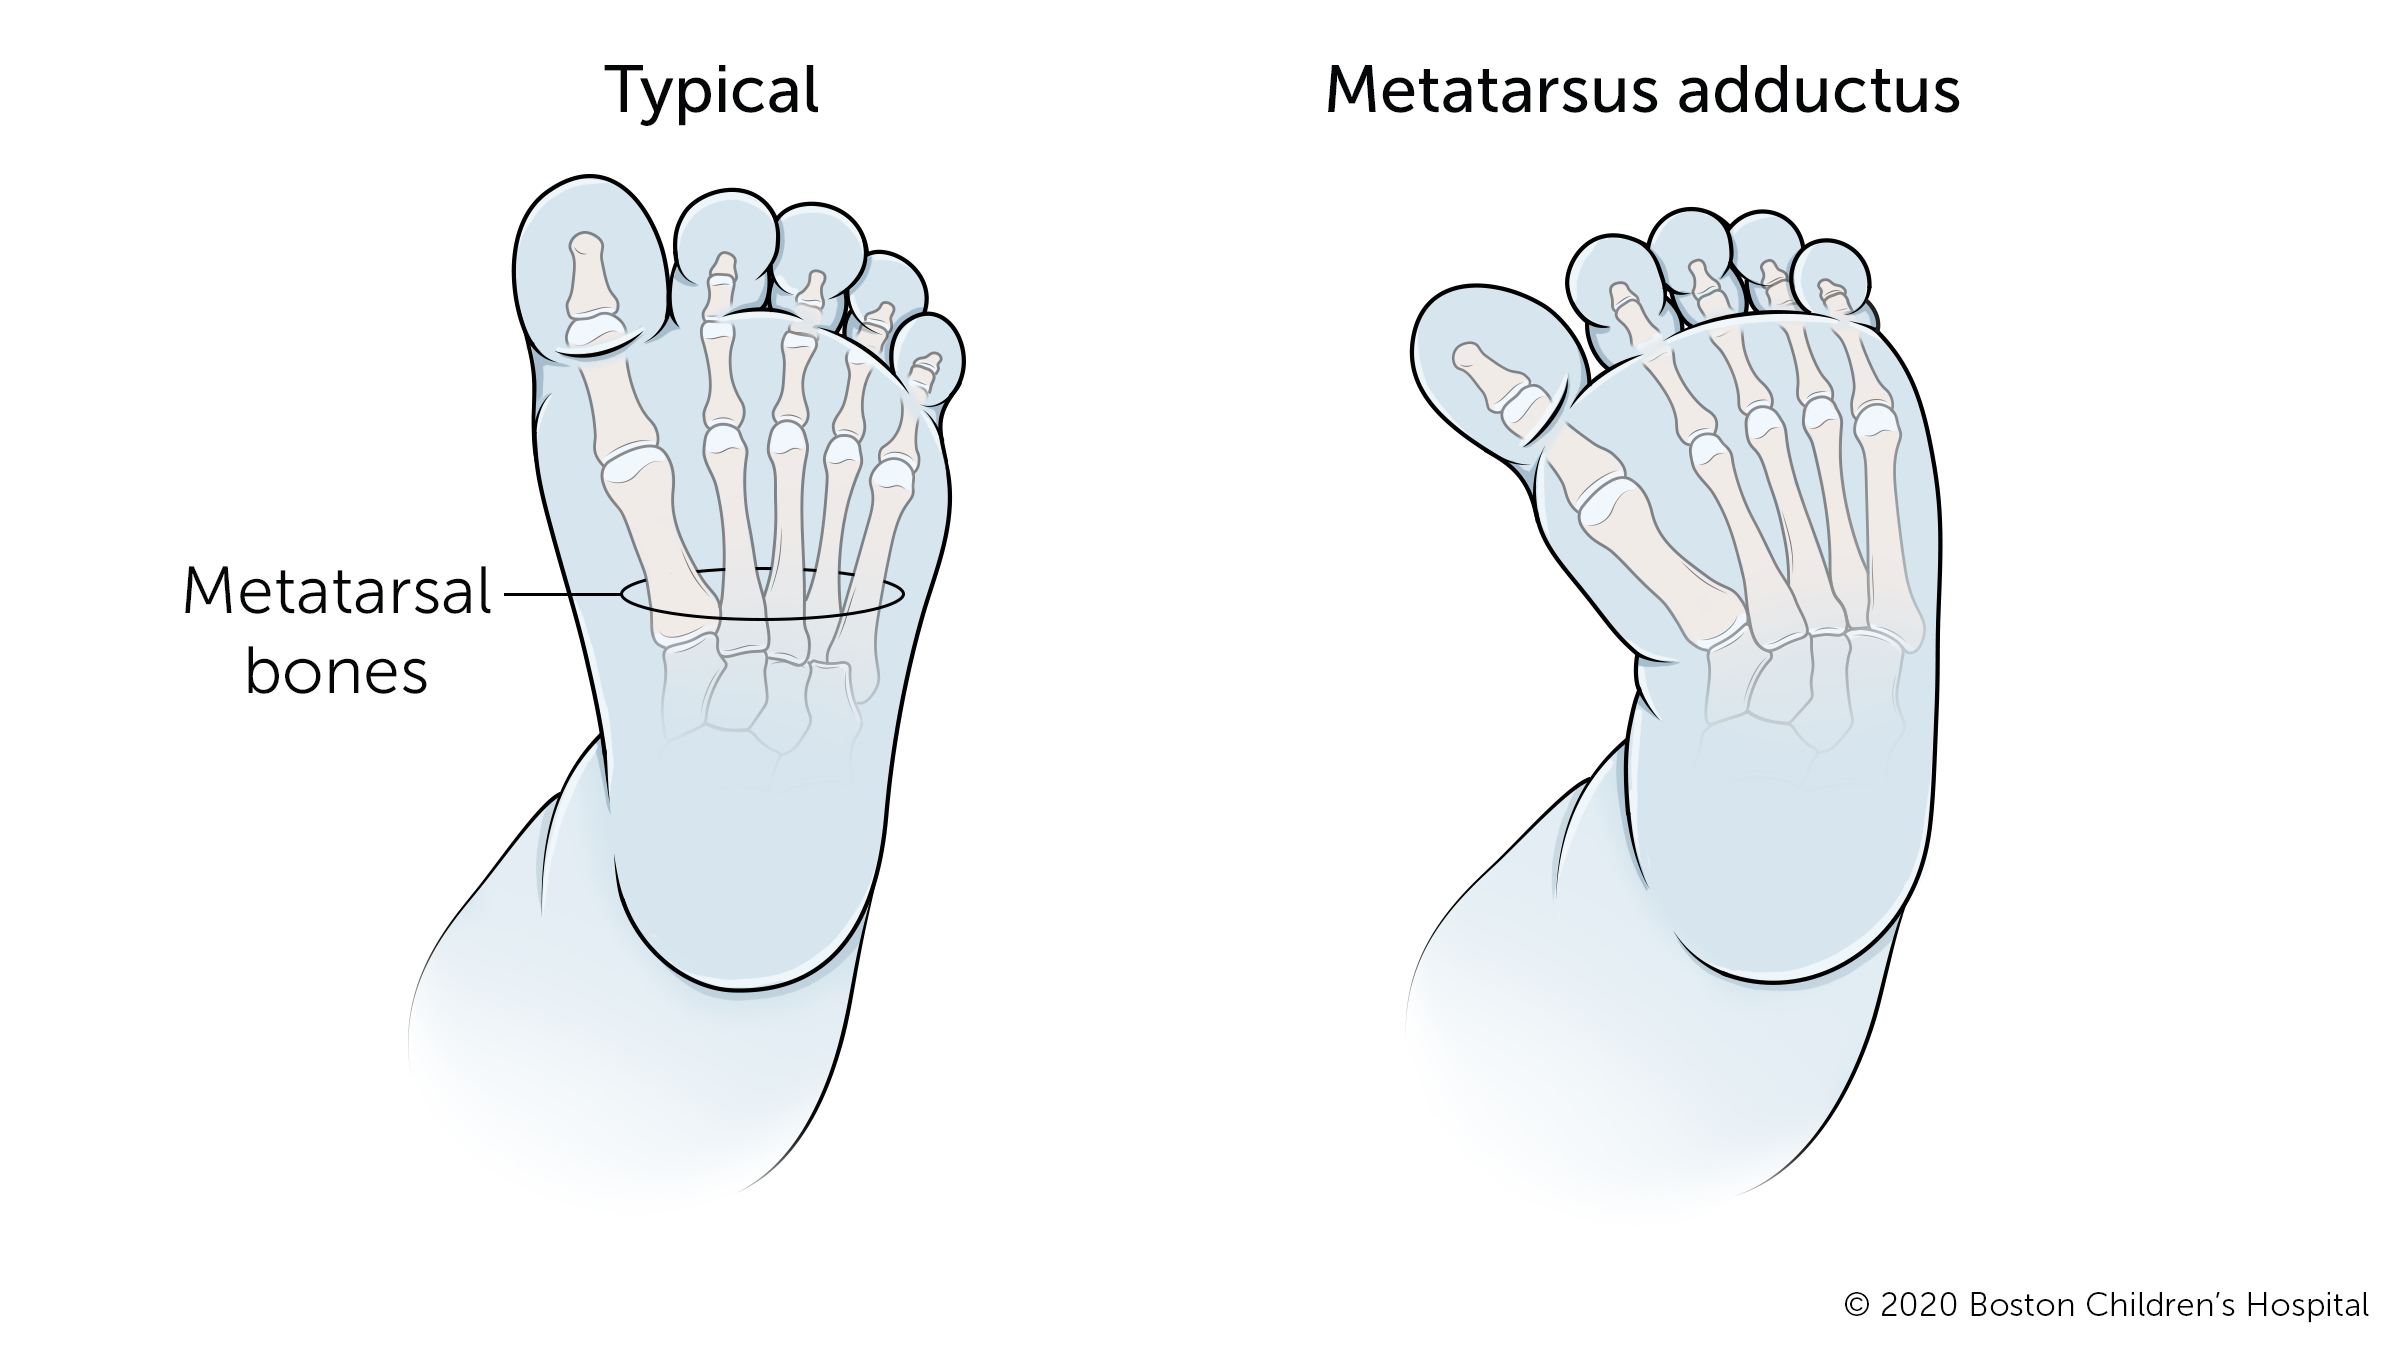 This is an illustration of a typical foot and a foot with metatarsus adductus.